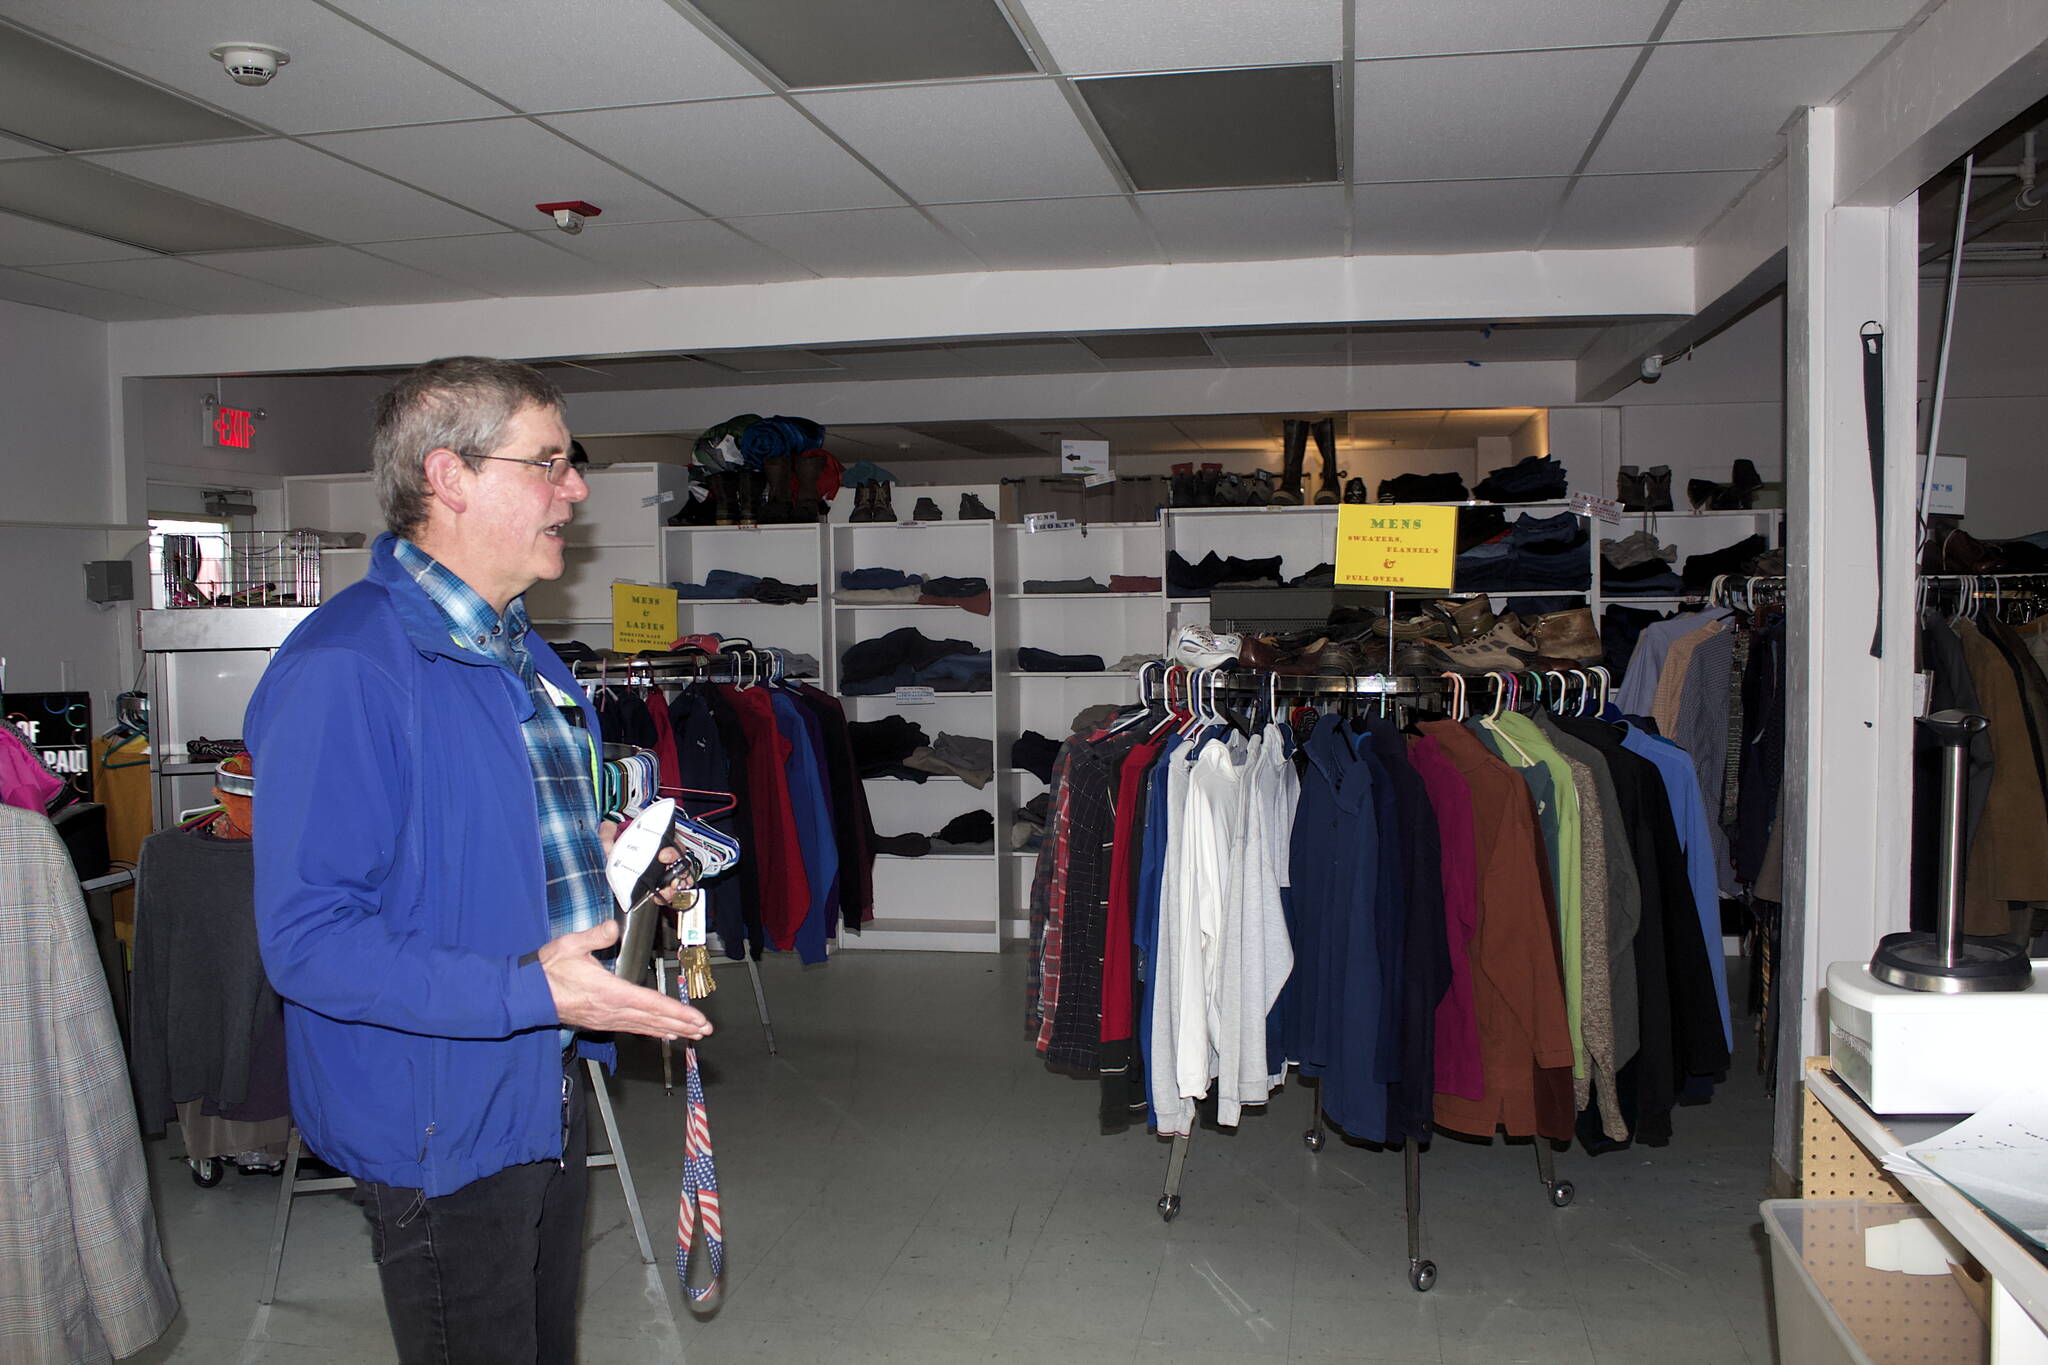 A program making clothing and household items available at the Dan Austin Free Store at the Society of St. Vincent de Paul’s Teal Street complex is explained Wednesday by Dave Ringle, executive director of the Juneau chapter of the non-profit organization. He said the store is currently “full,” due in part to the need for volunteers able to sort donations and staff the store, and that volunteers for other programs are also needed due to a shortage resulting from the COVID-19 pandemic and the aging of current volunteers. (Mark Sabbatini / Juneau Empire)